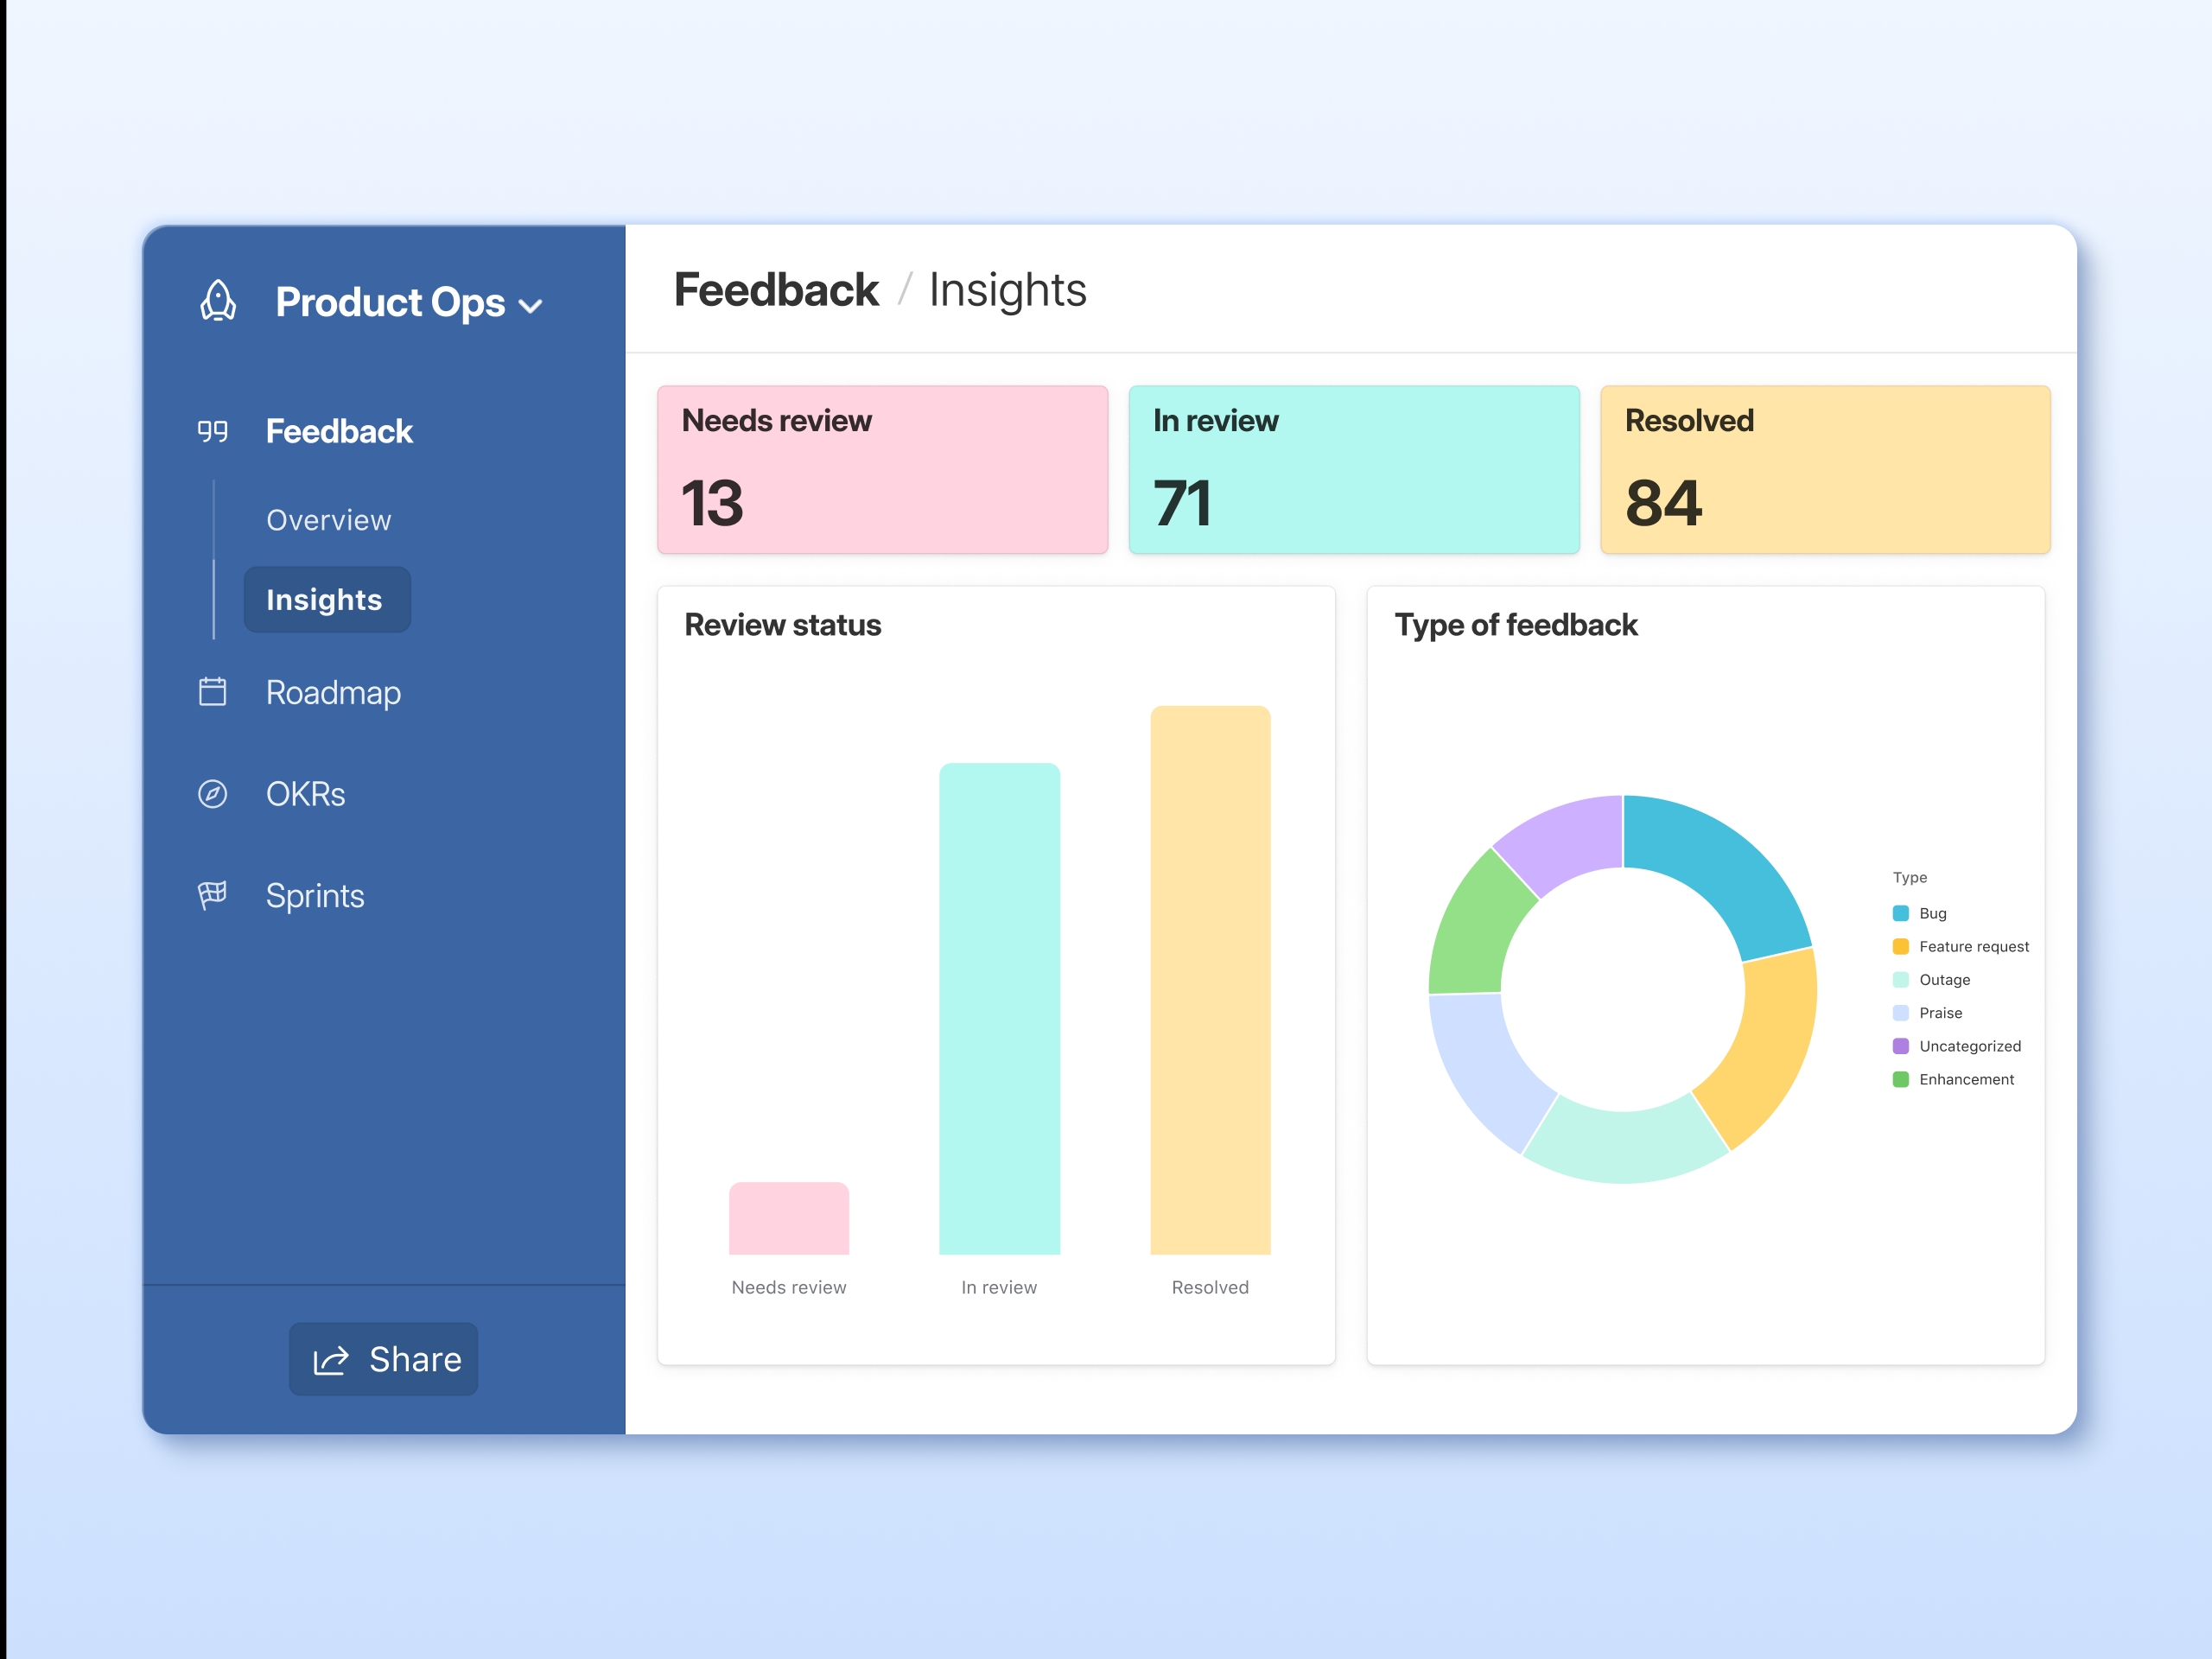 A dashboard shows charts and stats for feedback by review status and type